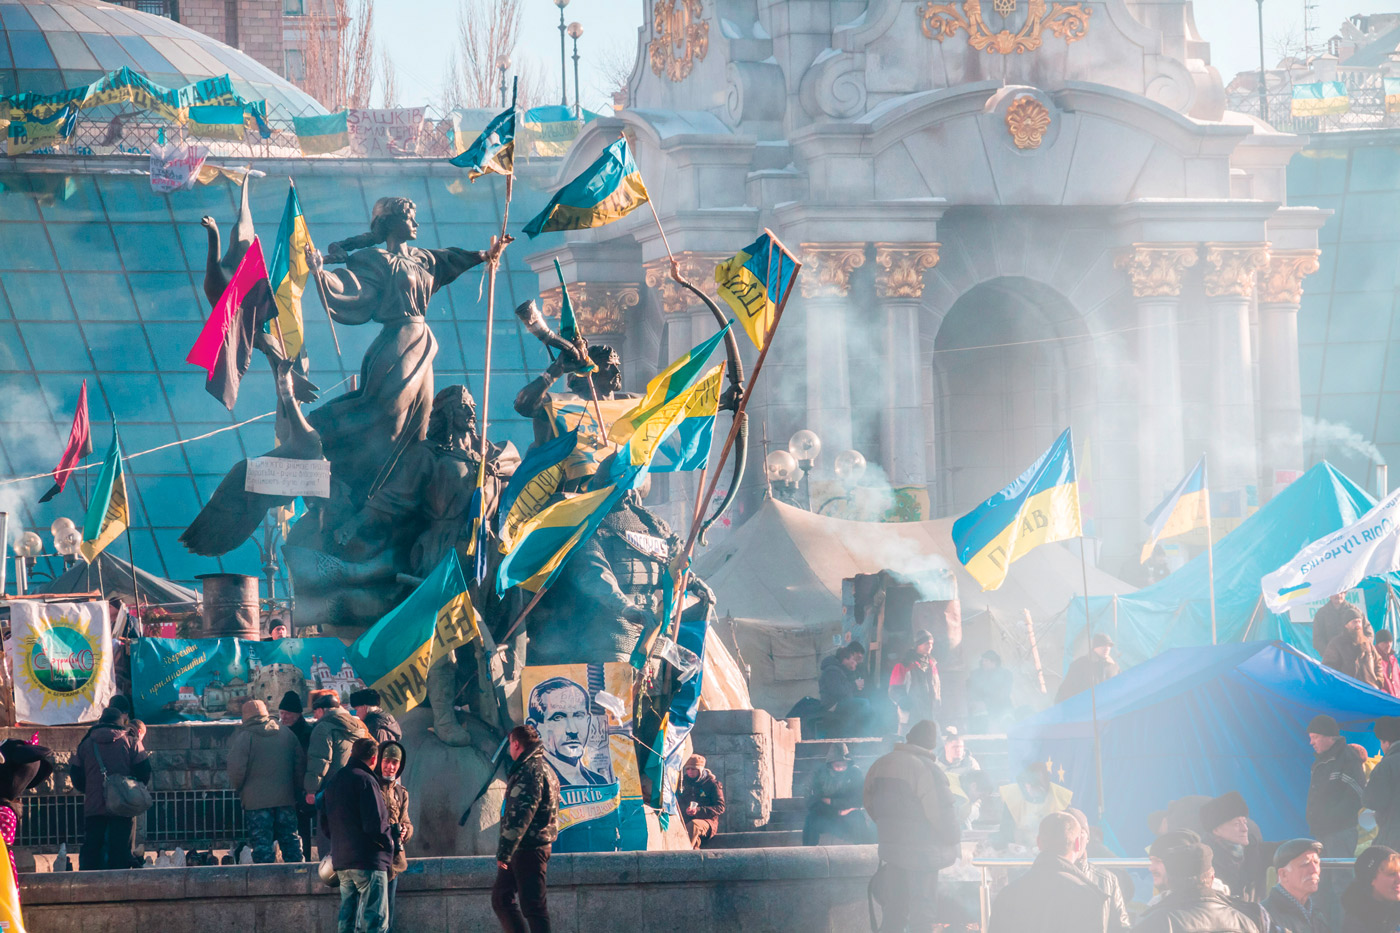 Located in Independence Square, the monument to the founders of Kyiv is covered in protester flags. Photo: Demotix.com.